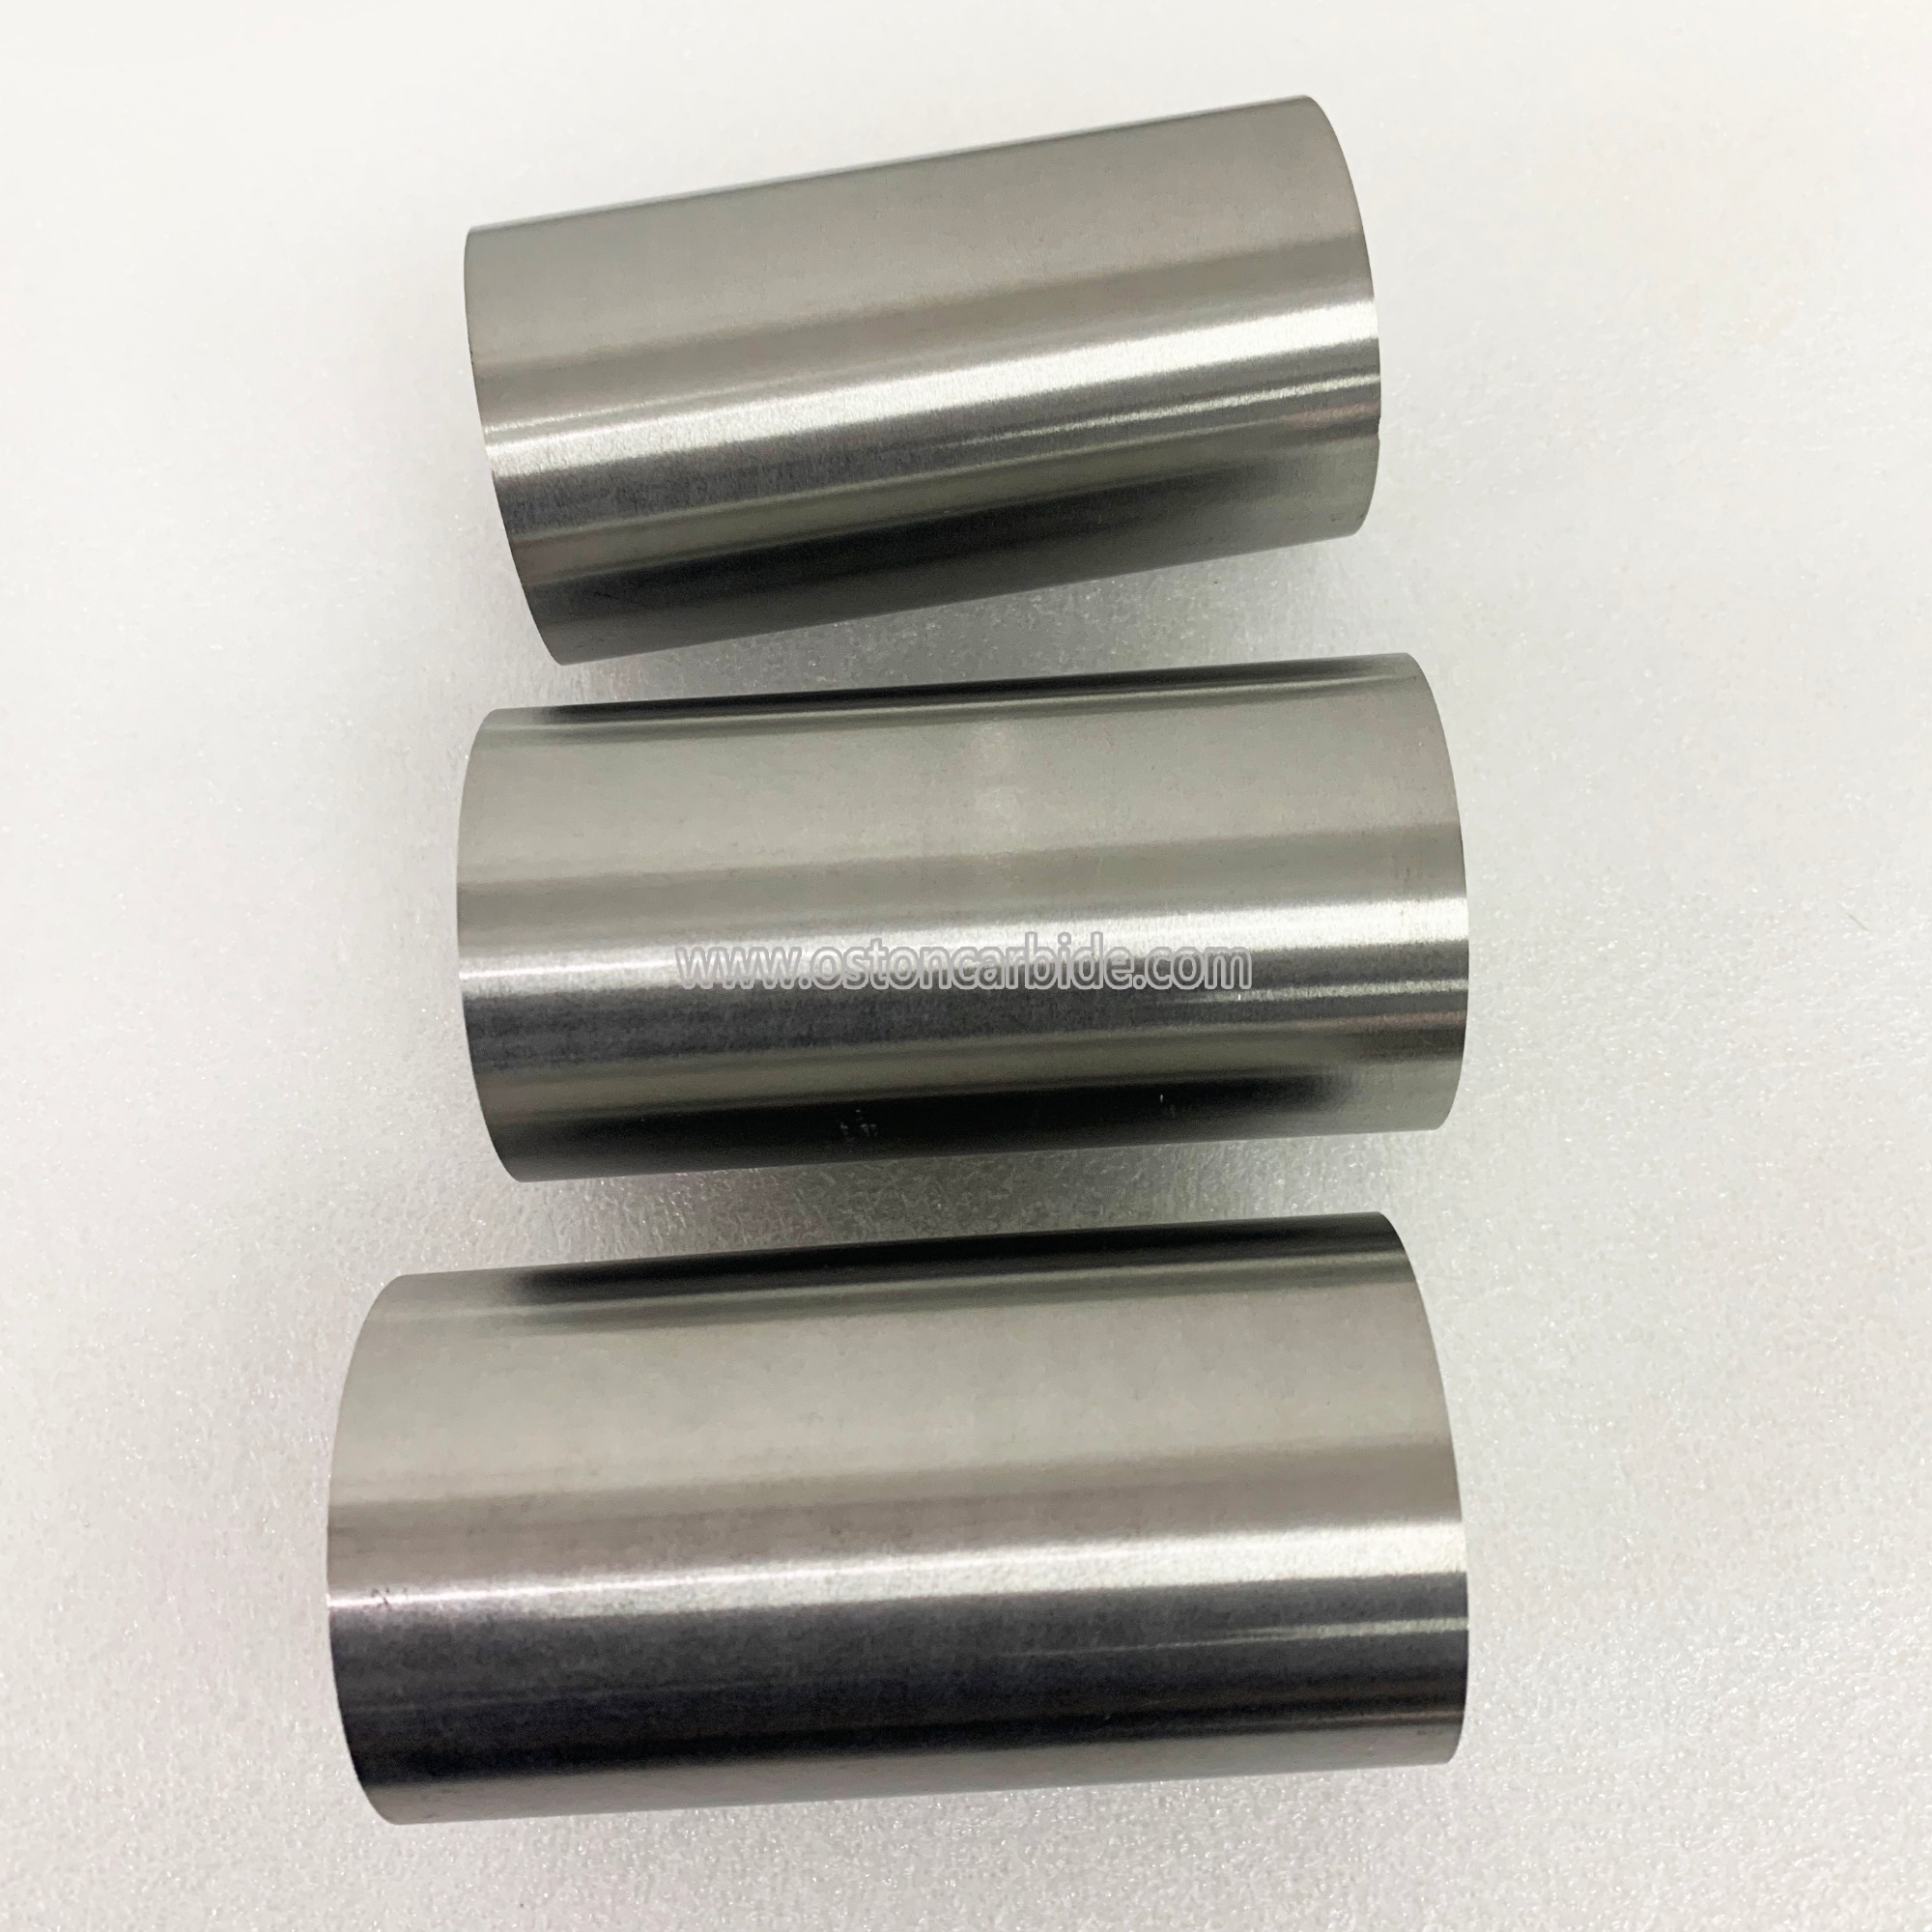 D40*100mm YG20C Tungsten Carbide Punches,Tungsten Carbide Cylinder Rods for Metal Punching Die